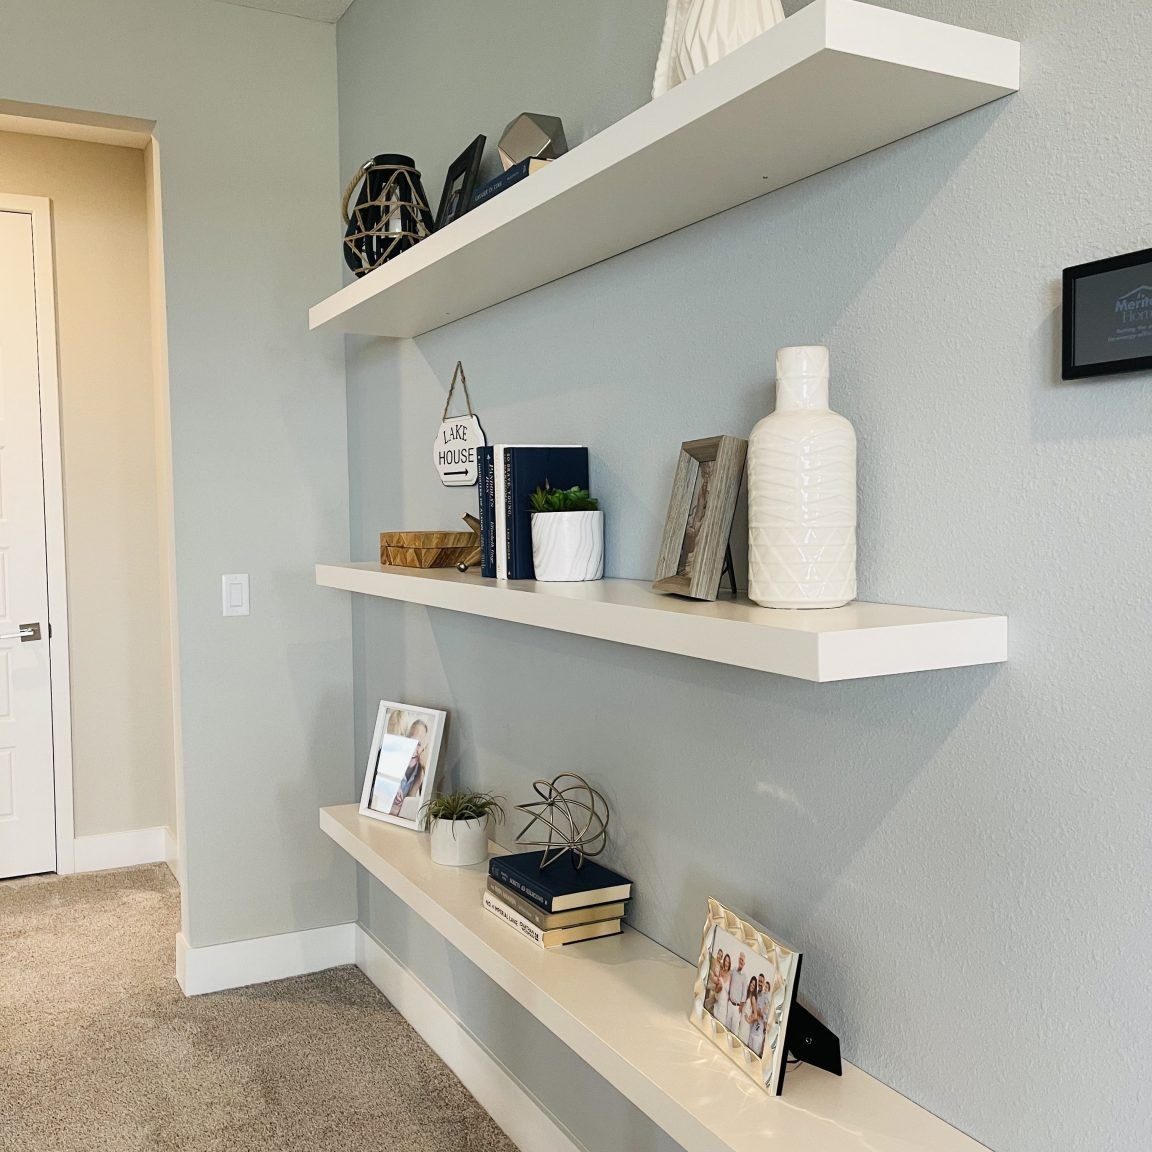 Build wall-to-wall floating shelves